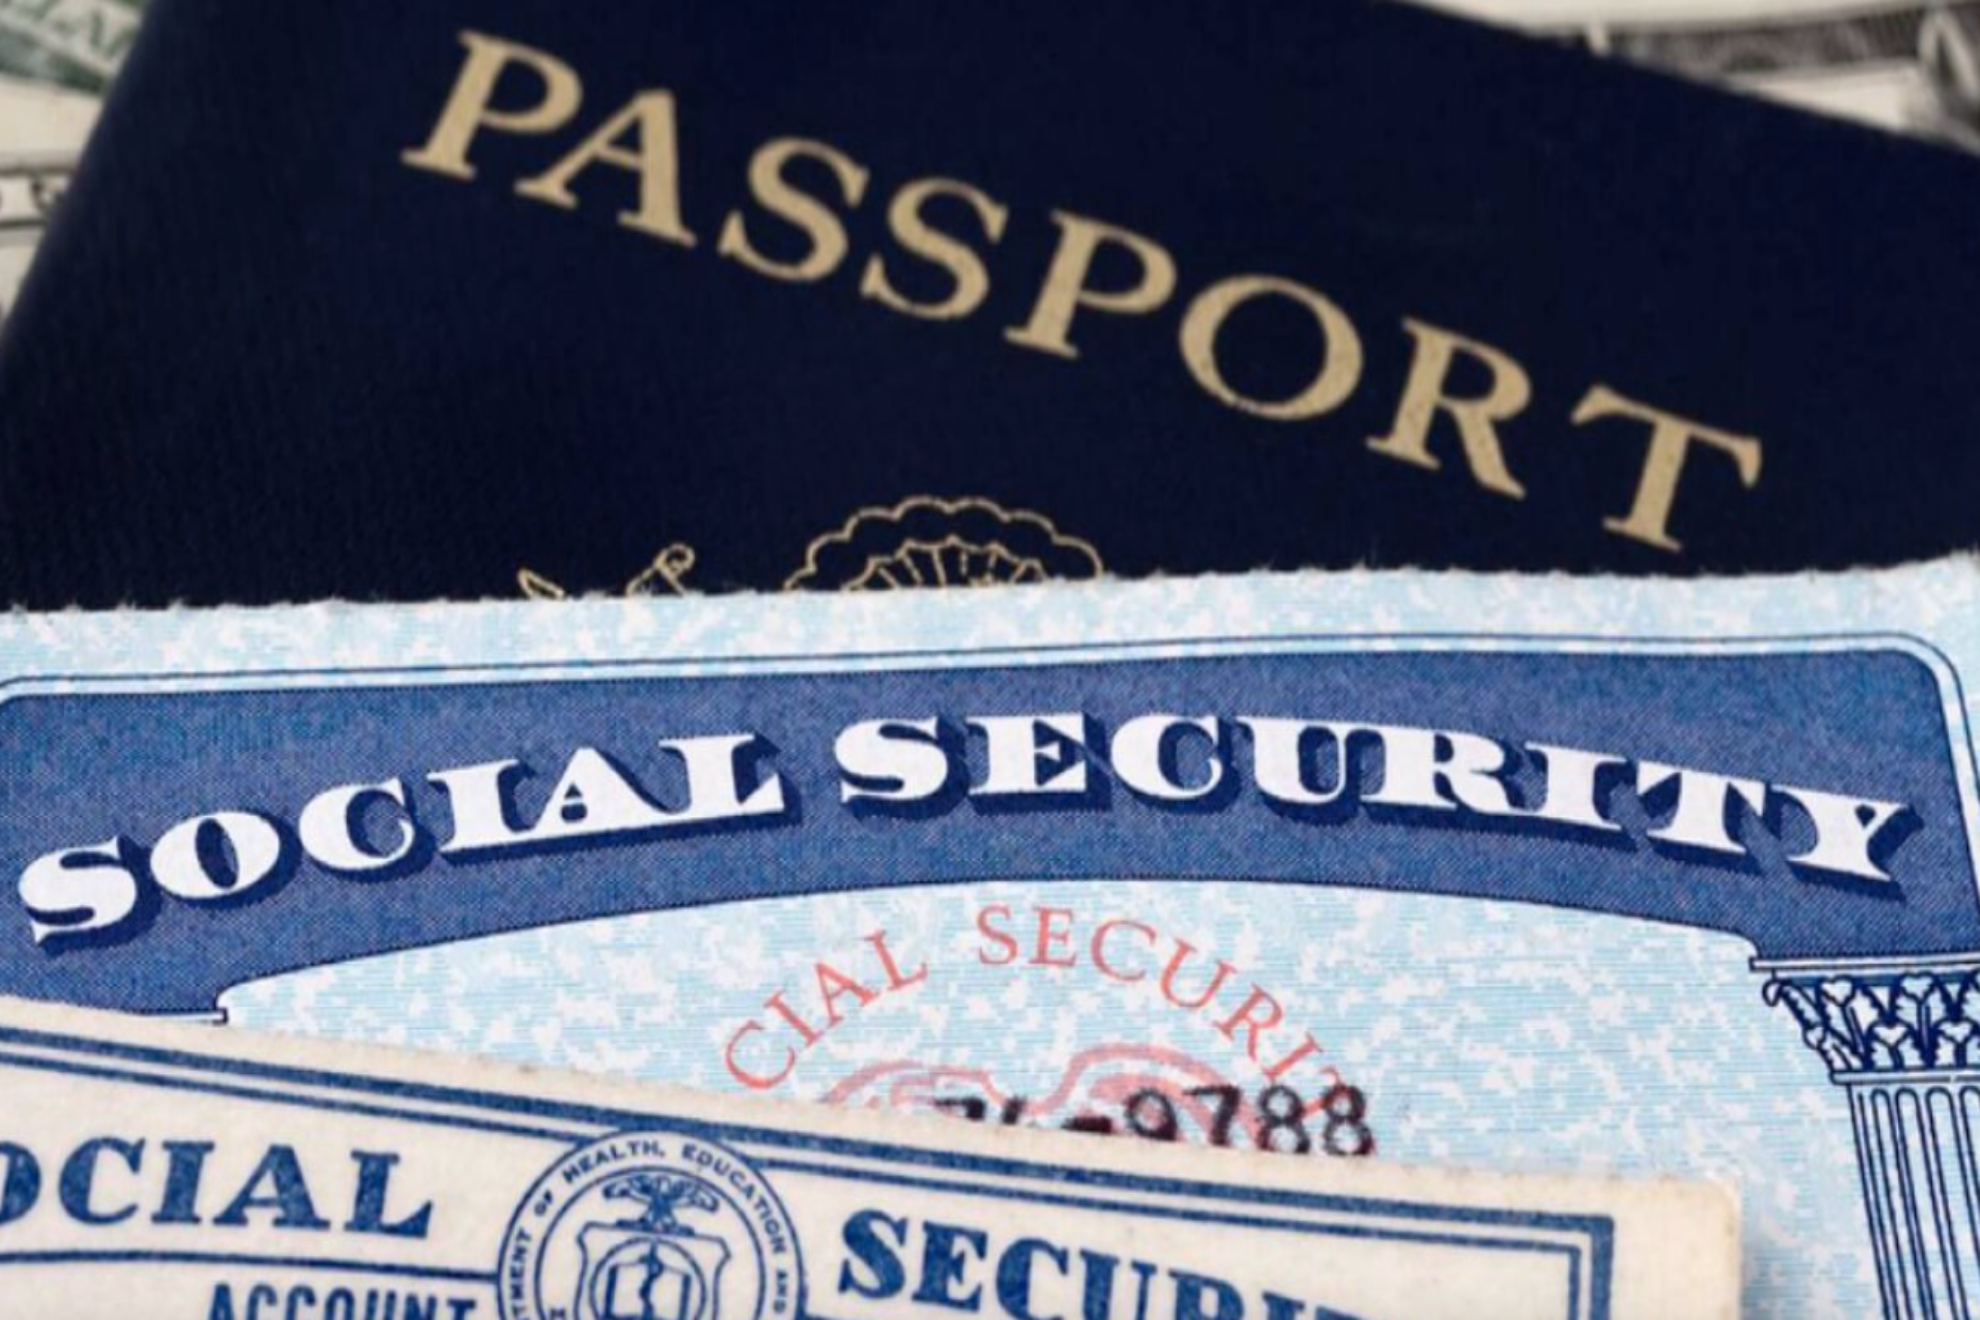 Social Security Benefits Payment: Are you getting your September payment this week? Find out here